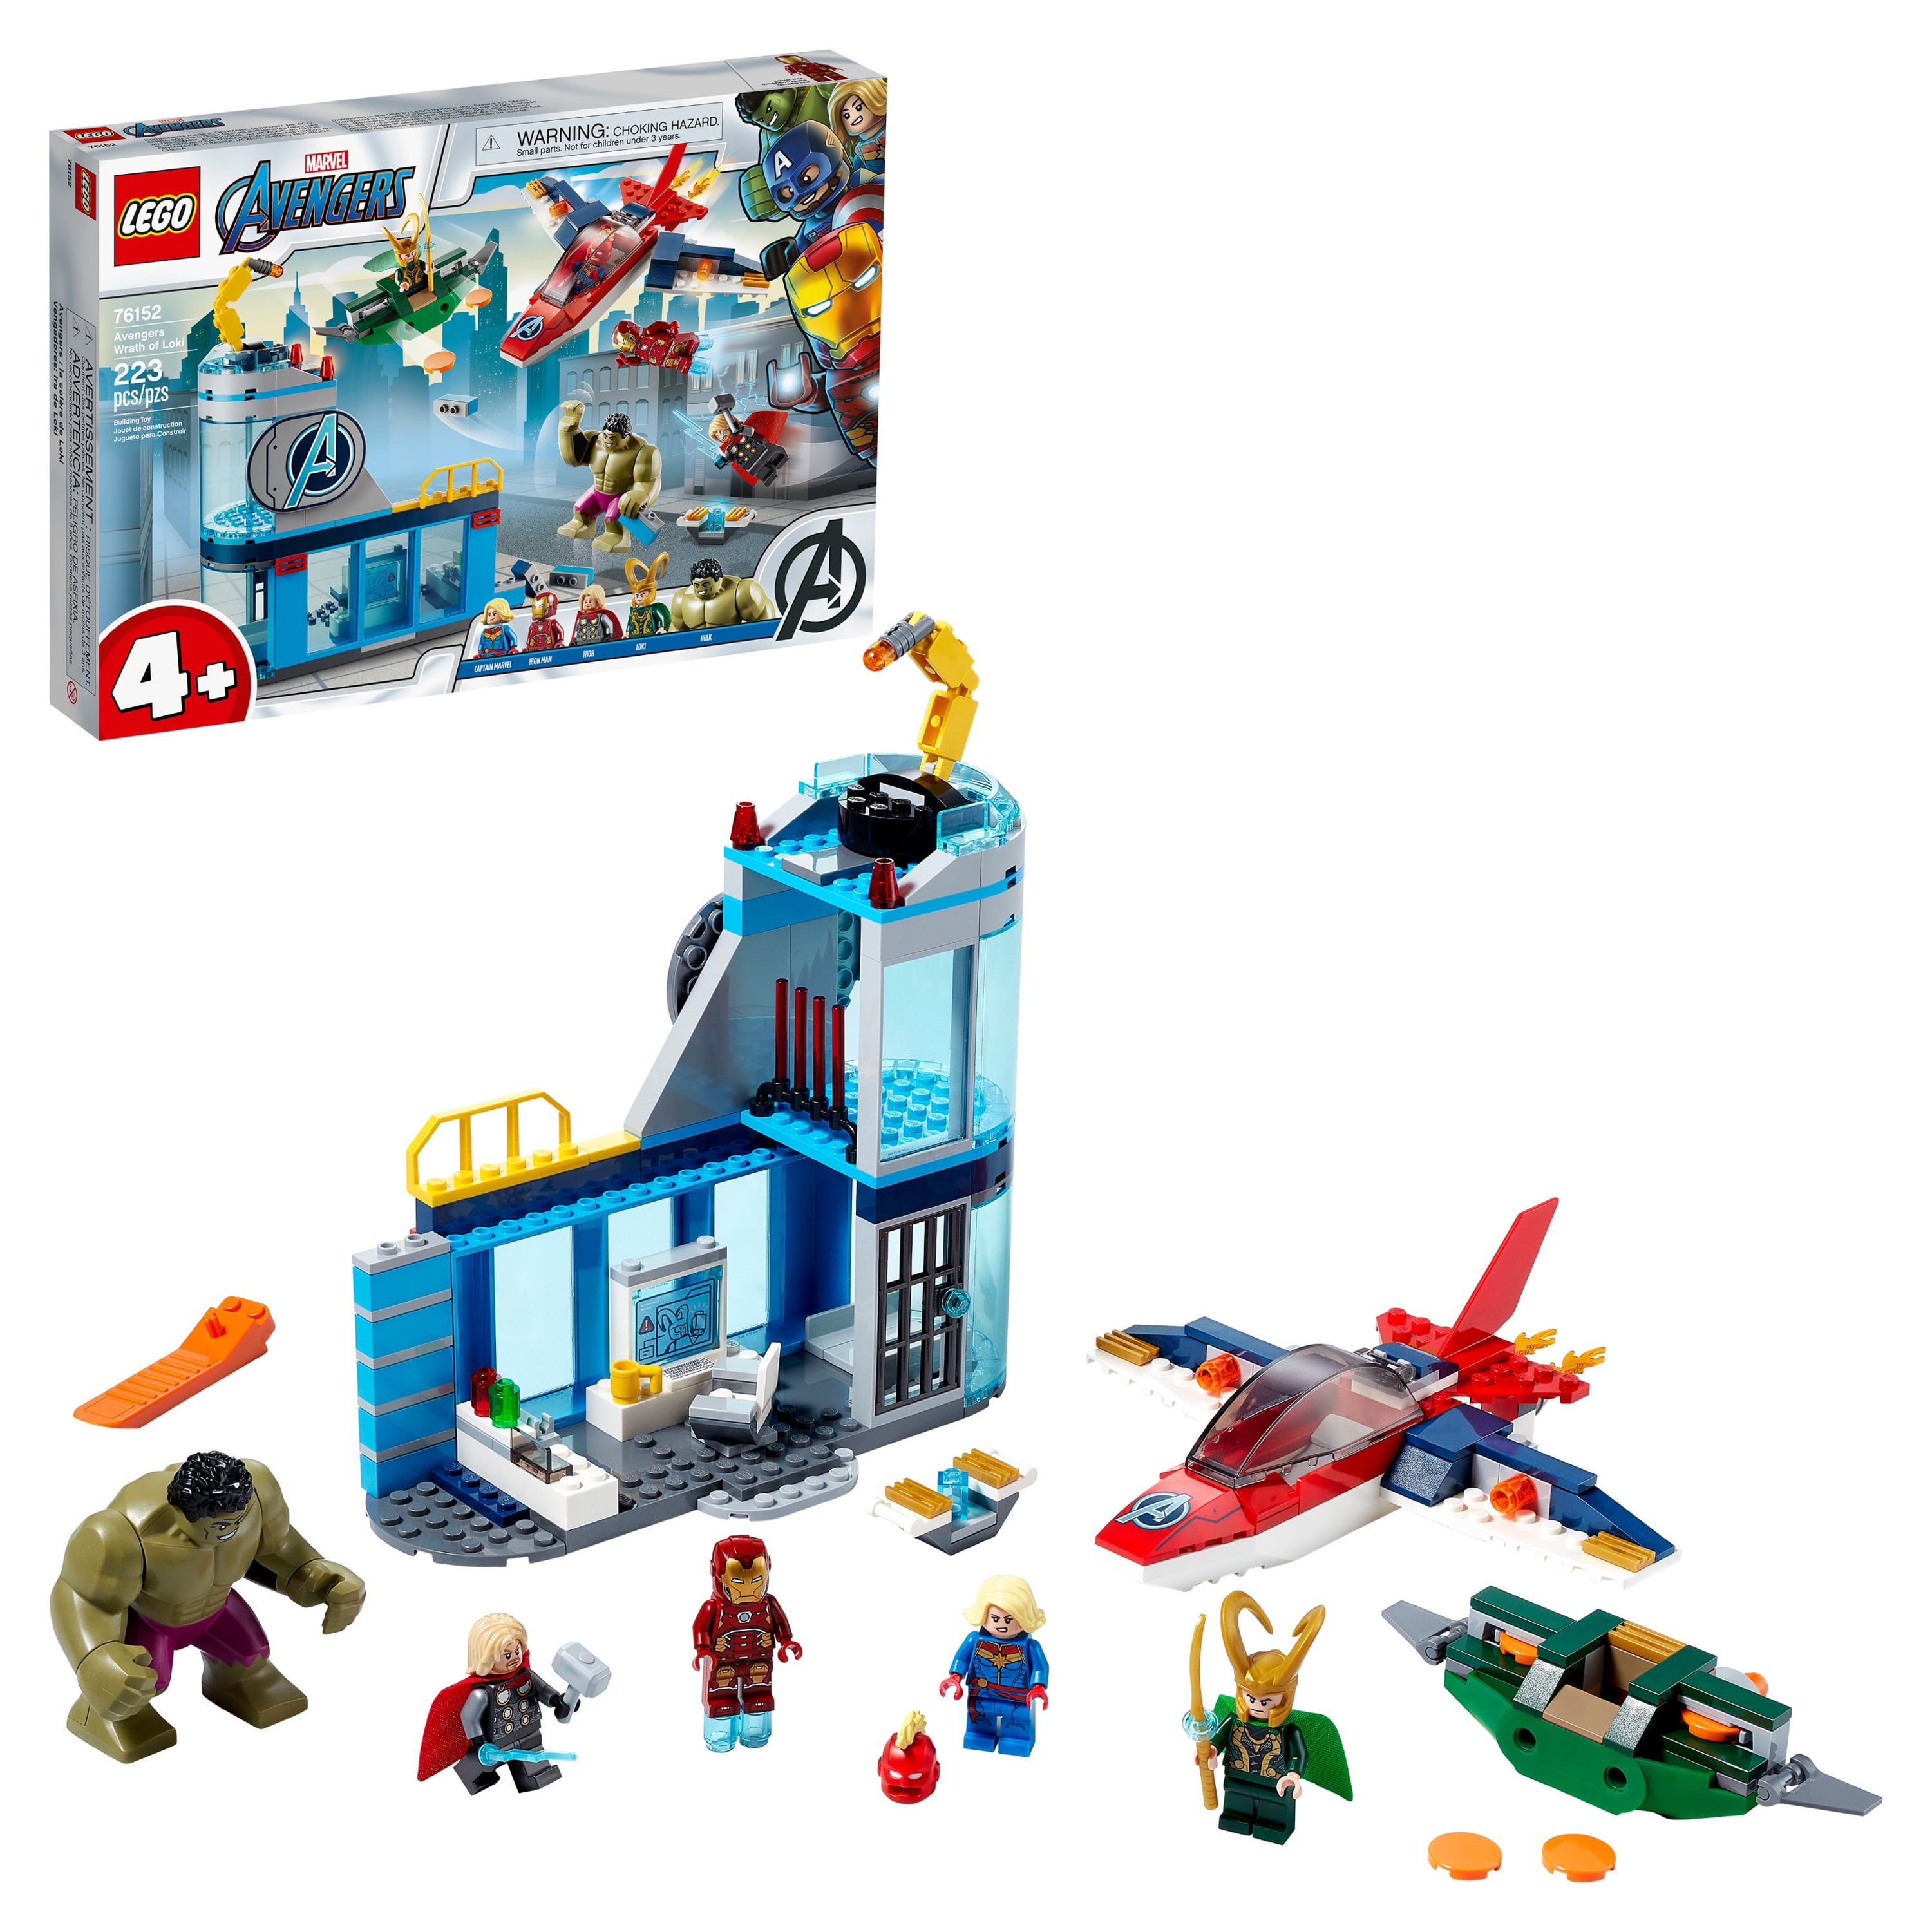 LEGO Marvel Avengers Wrath of Loki 76152 Cool Building Toy with Marvel Avengers Minifigures (223 Pieces) - image 1 of 8